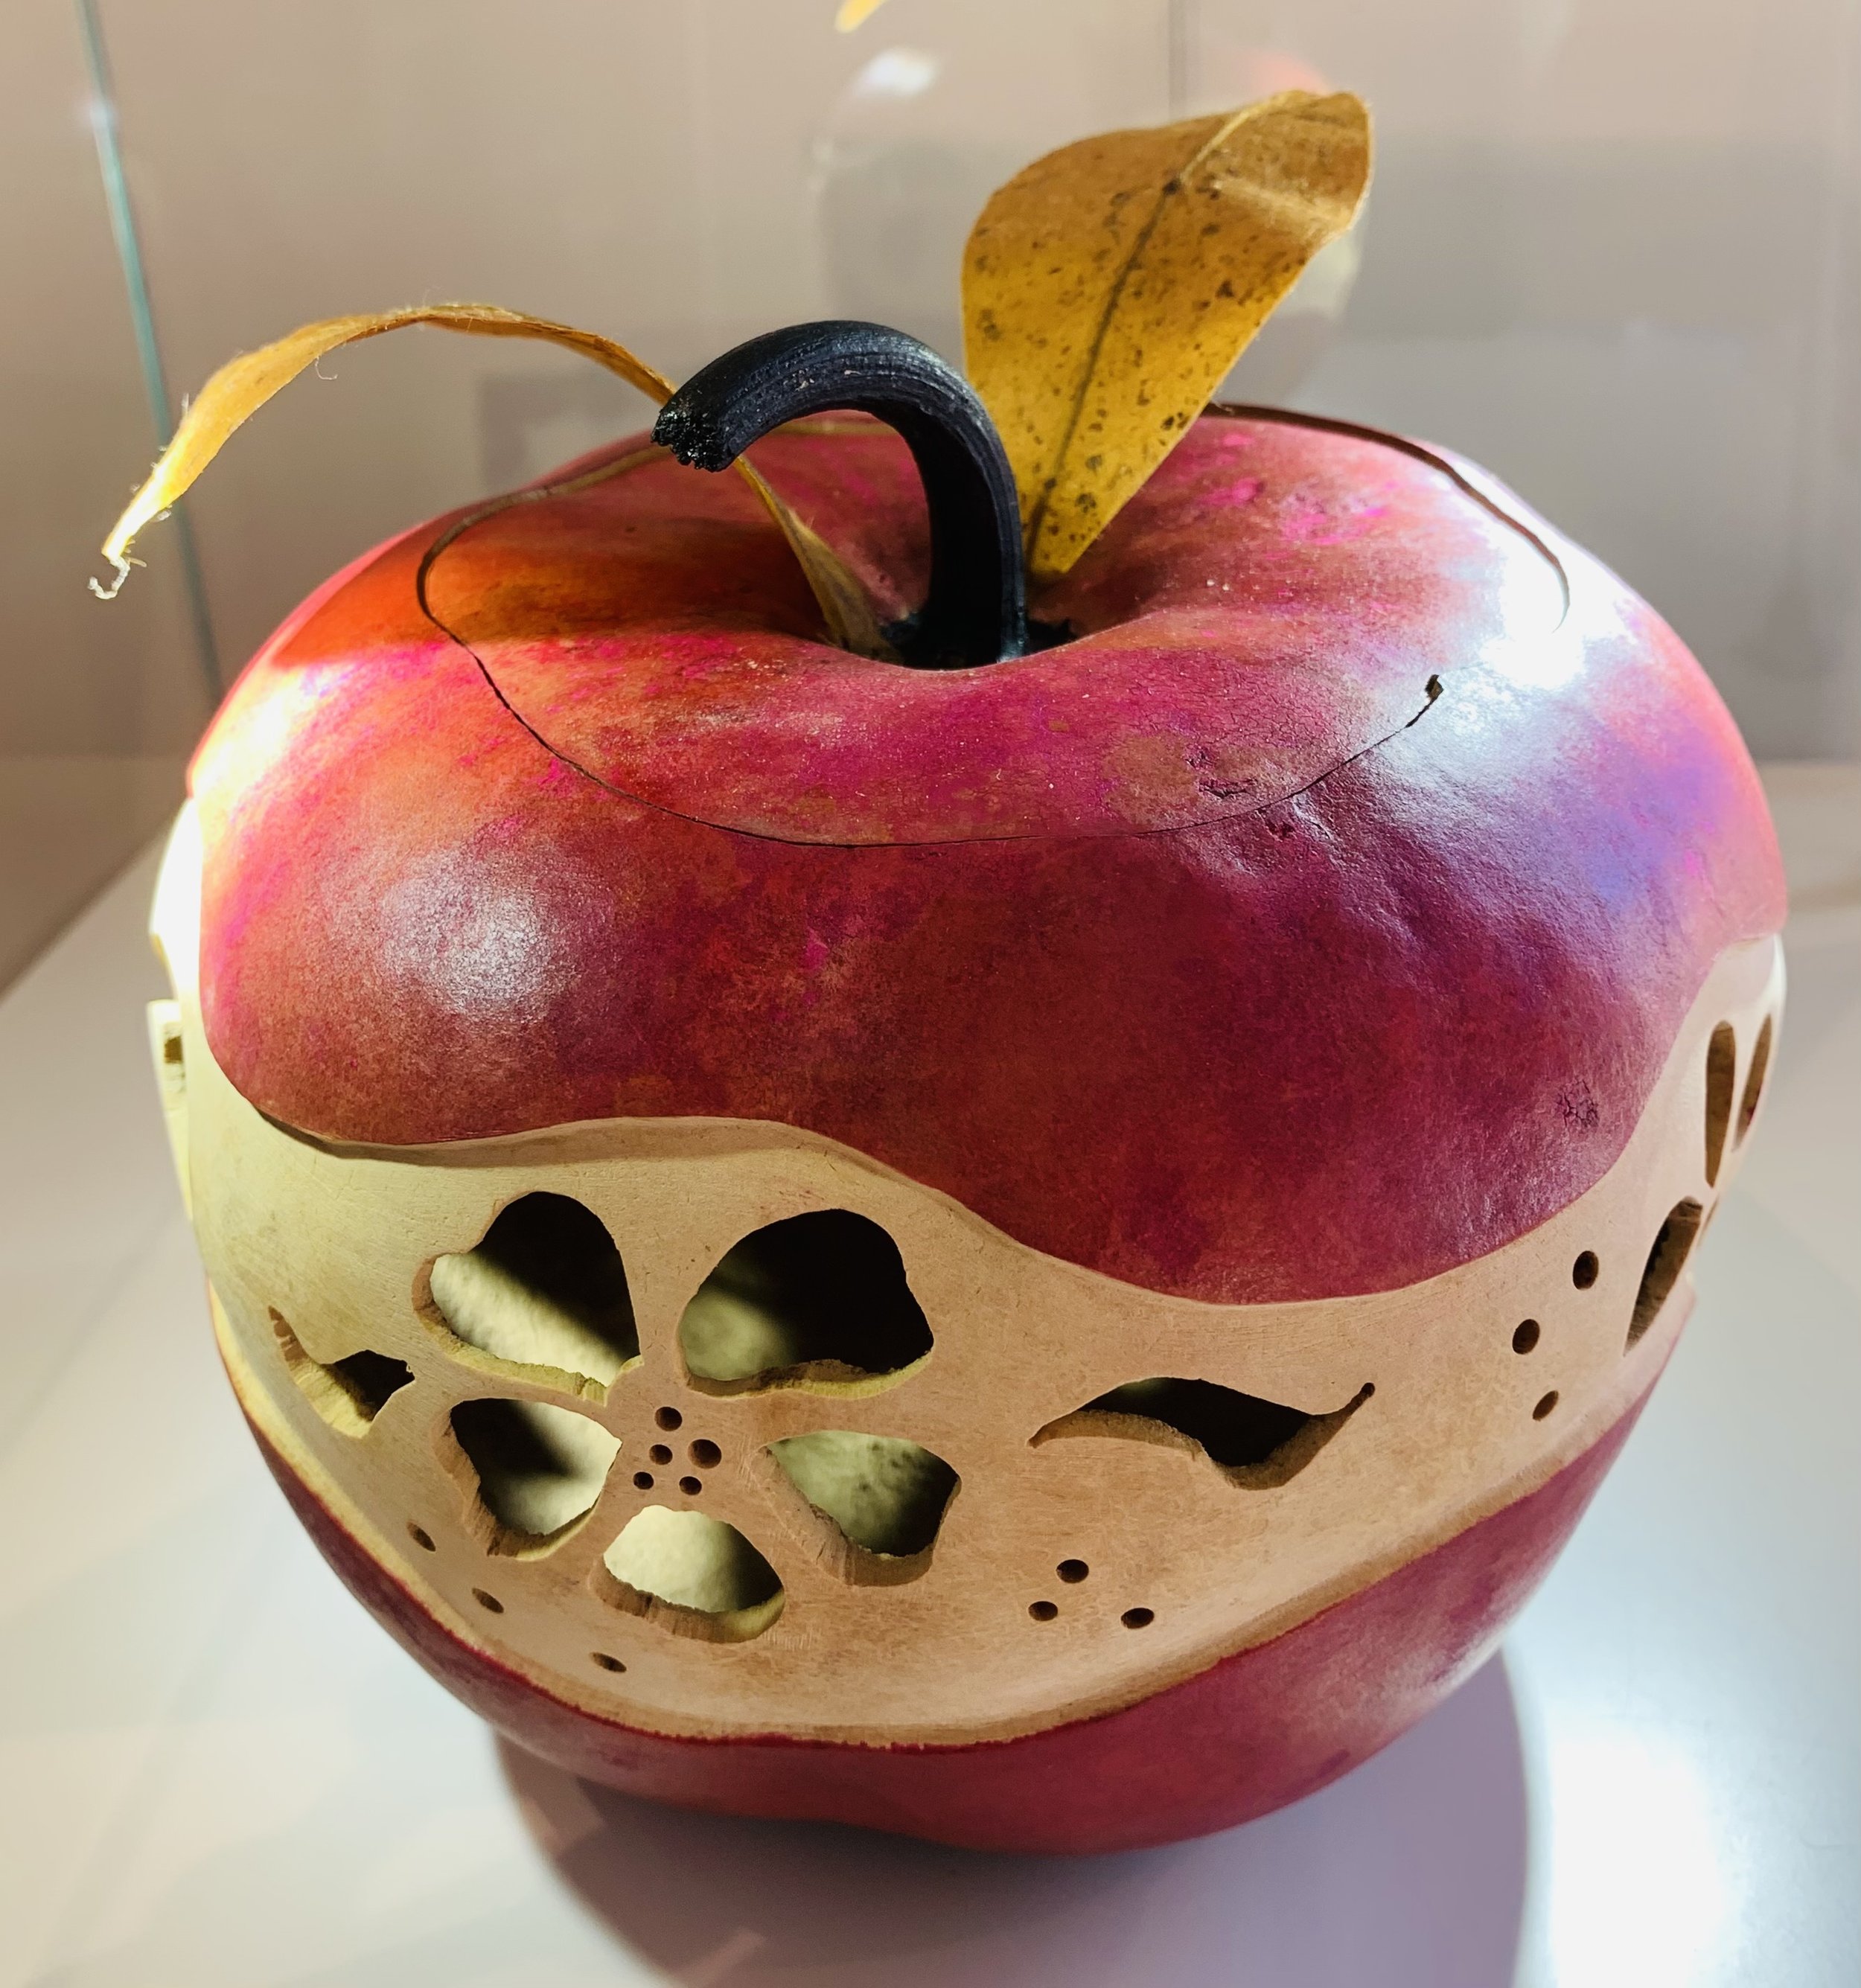  Sharon Medhurst, “Gourd Container with Lid”, carved and hand painted, 6.5”x7.5”, $85⁠ 